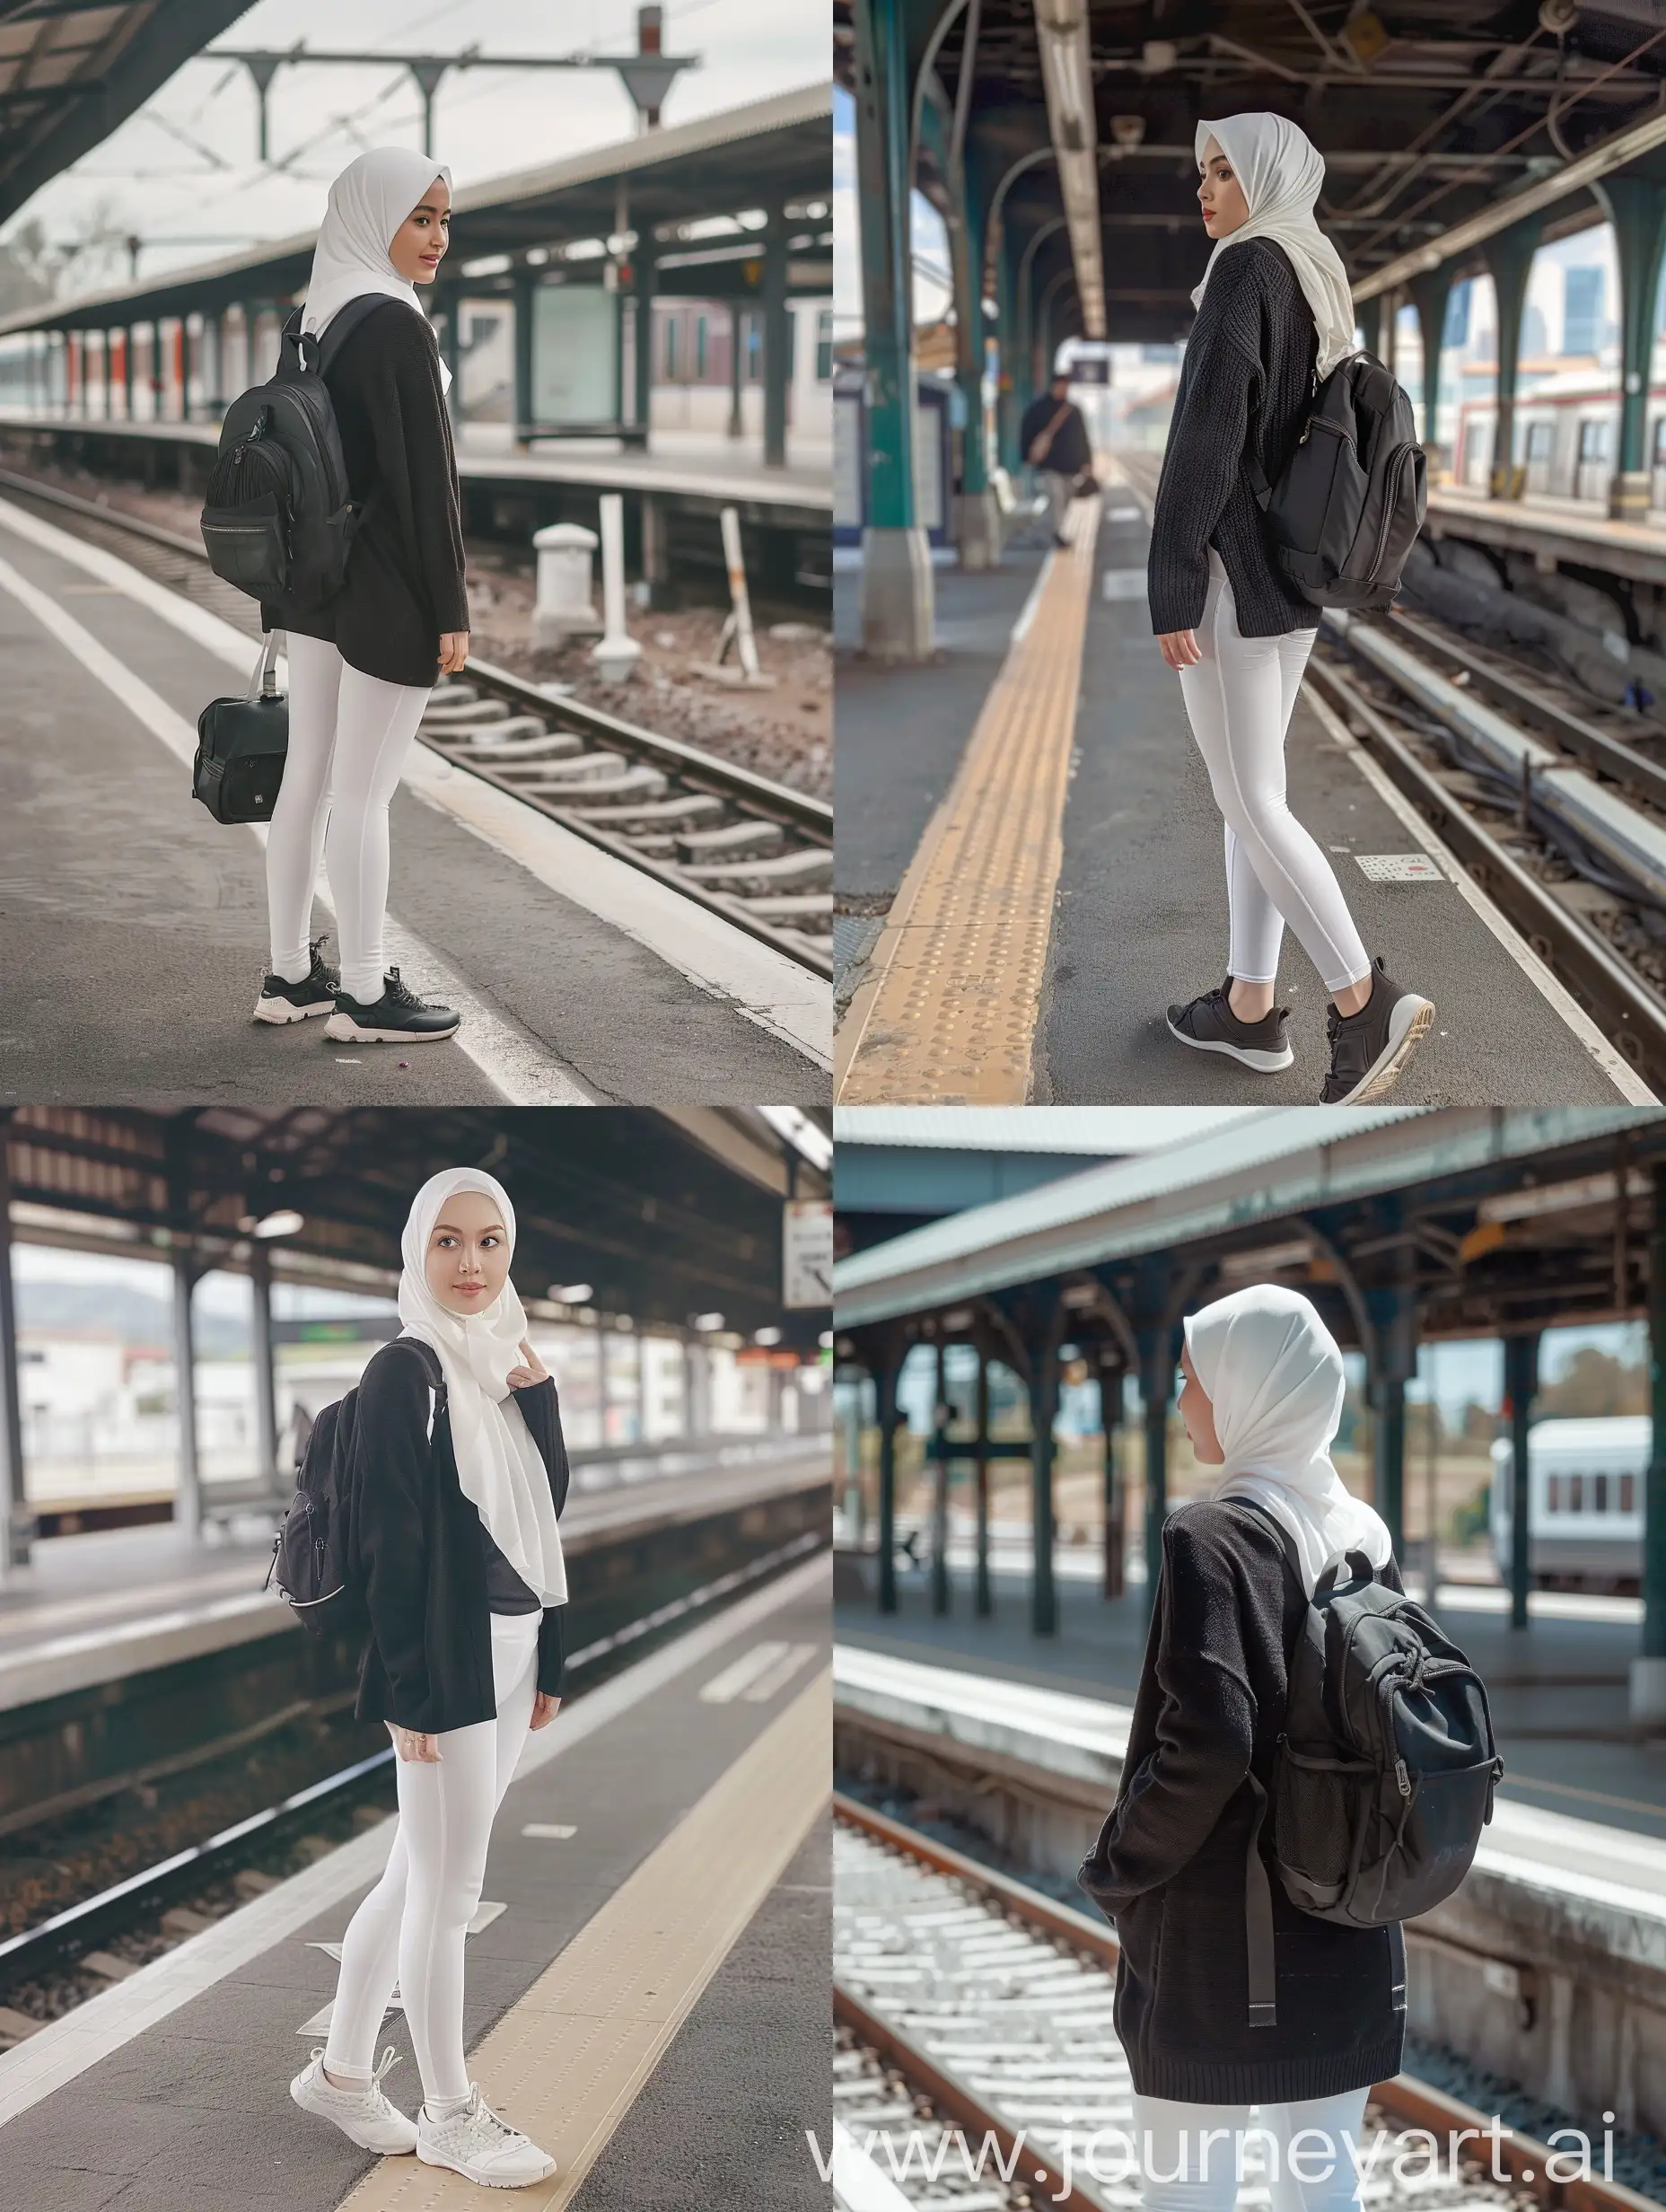 An Indonesian woman wearing a white hijab, wearing a black cardigan, and wearing white leggings and a small black backpack. Standing at the train station